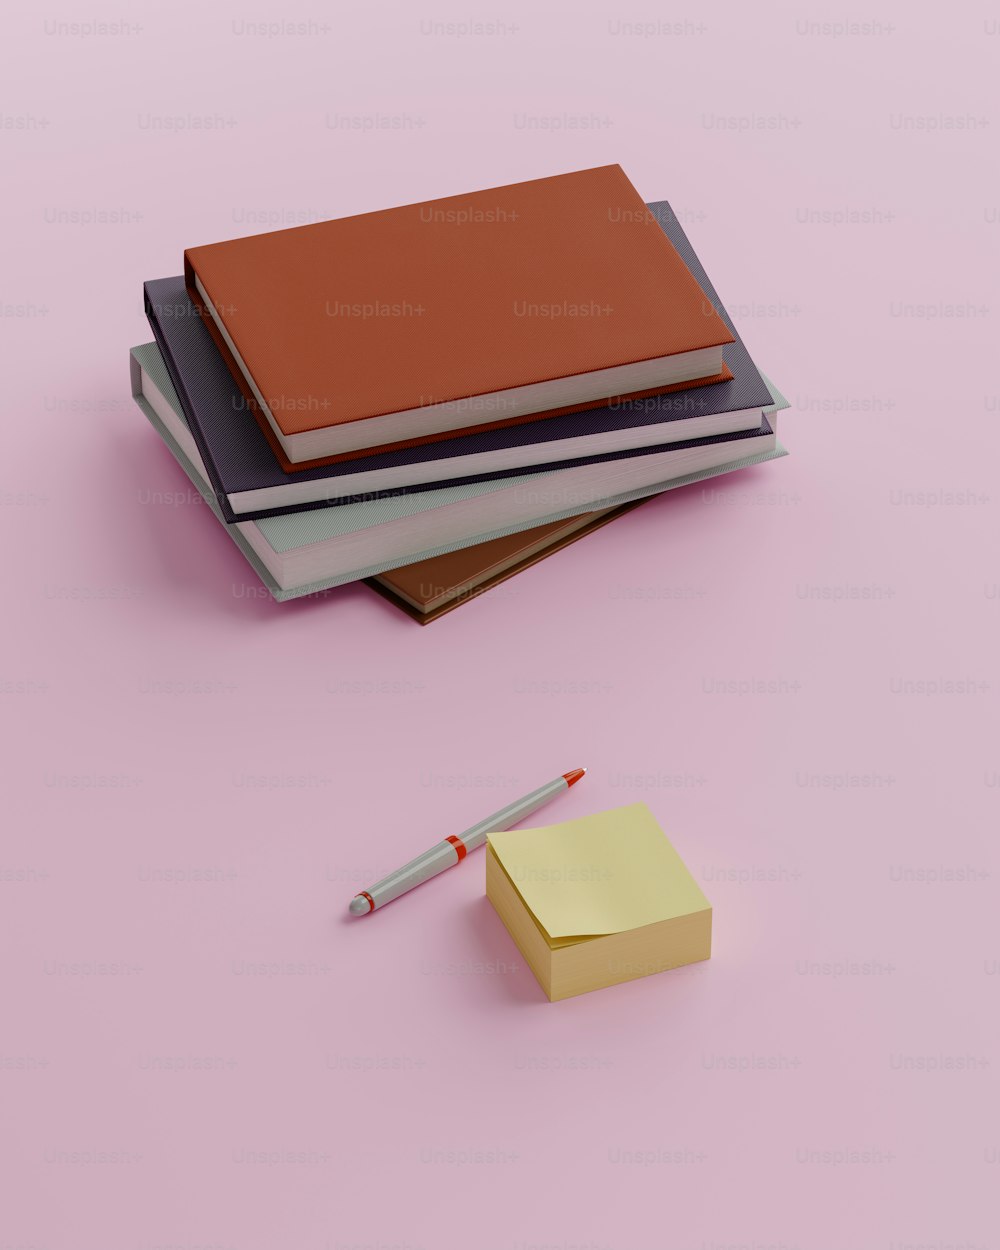 a stack of books and a pen on a pink surface